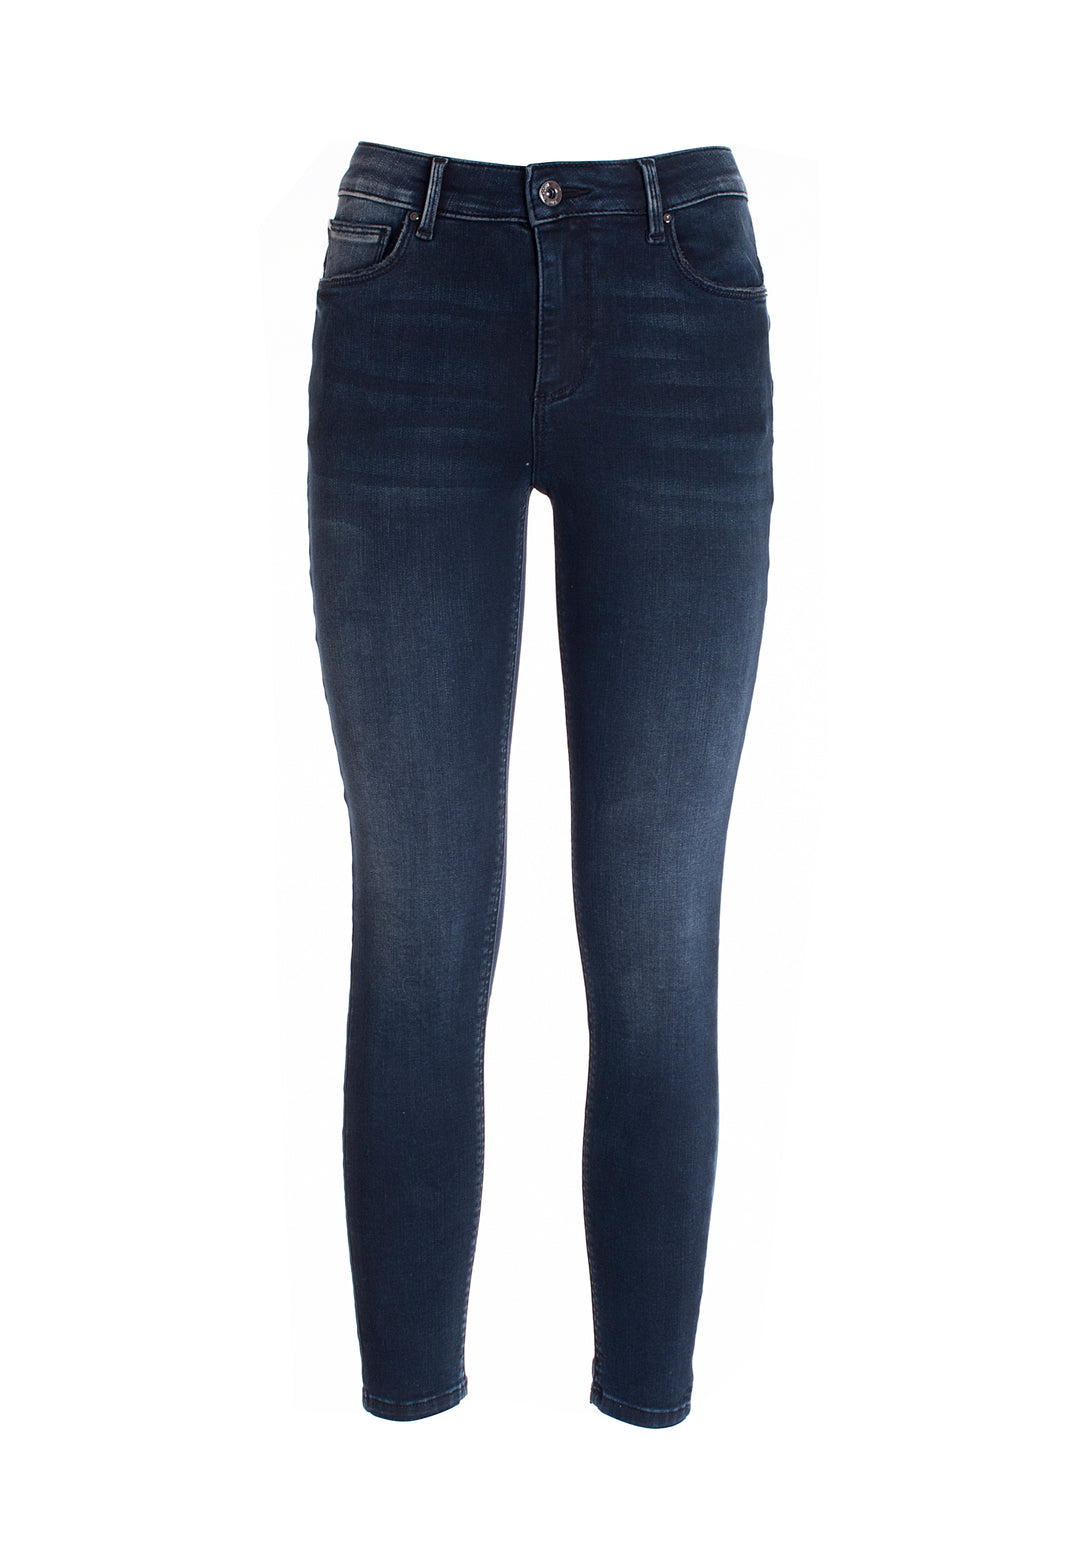 Jeans skinny fit with push-up effect made in stretch denim with dark wash